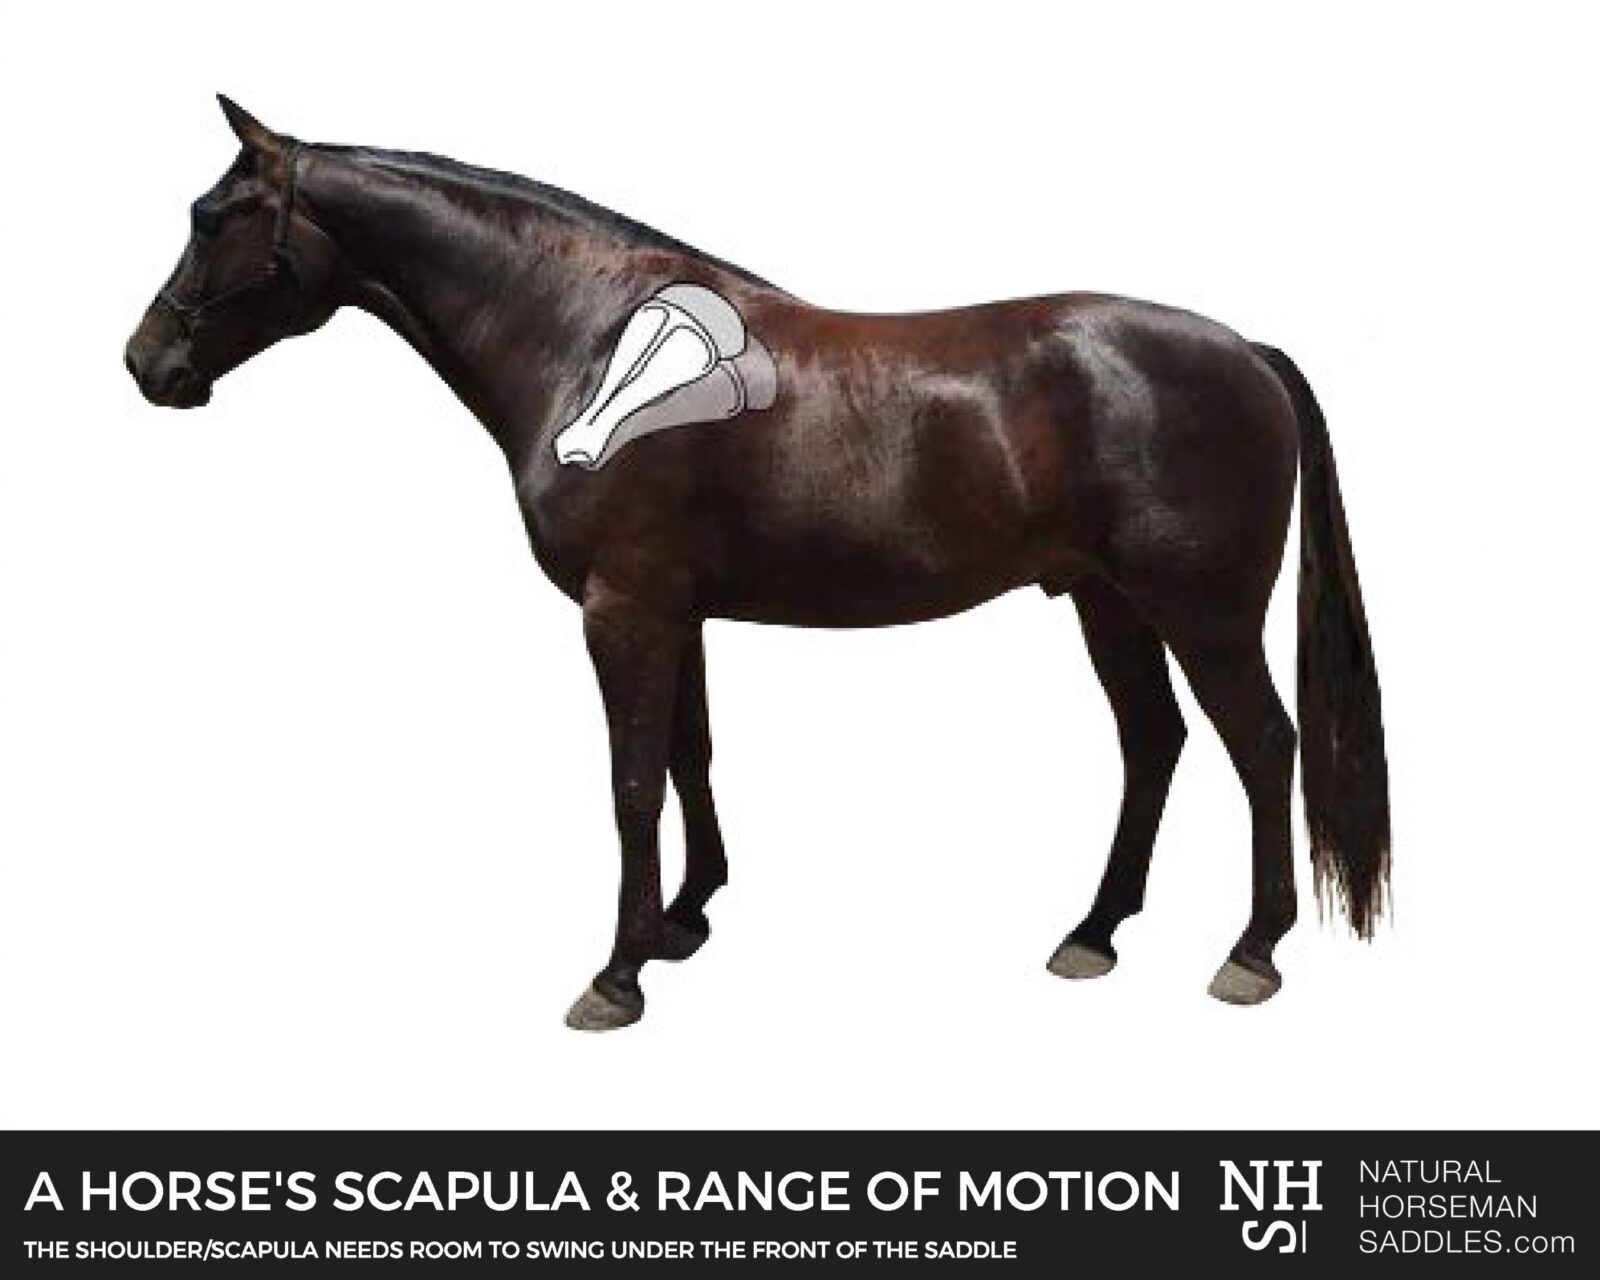 The horses' scapula and its range of motion.